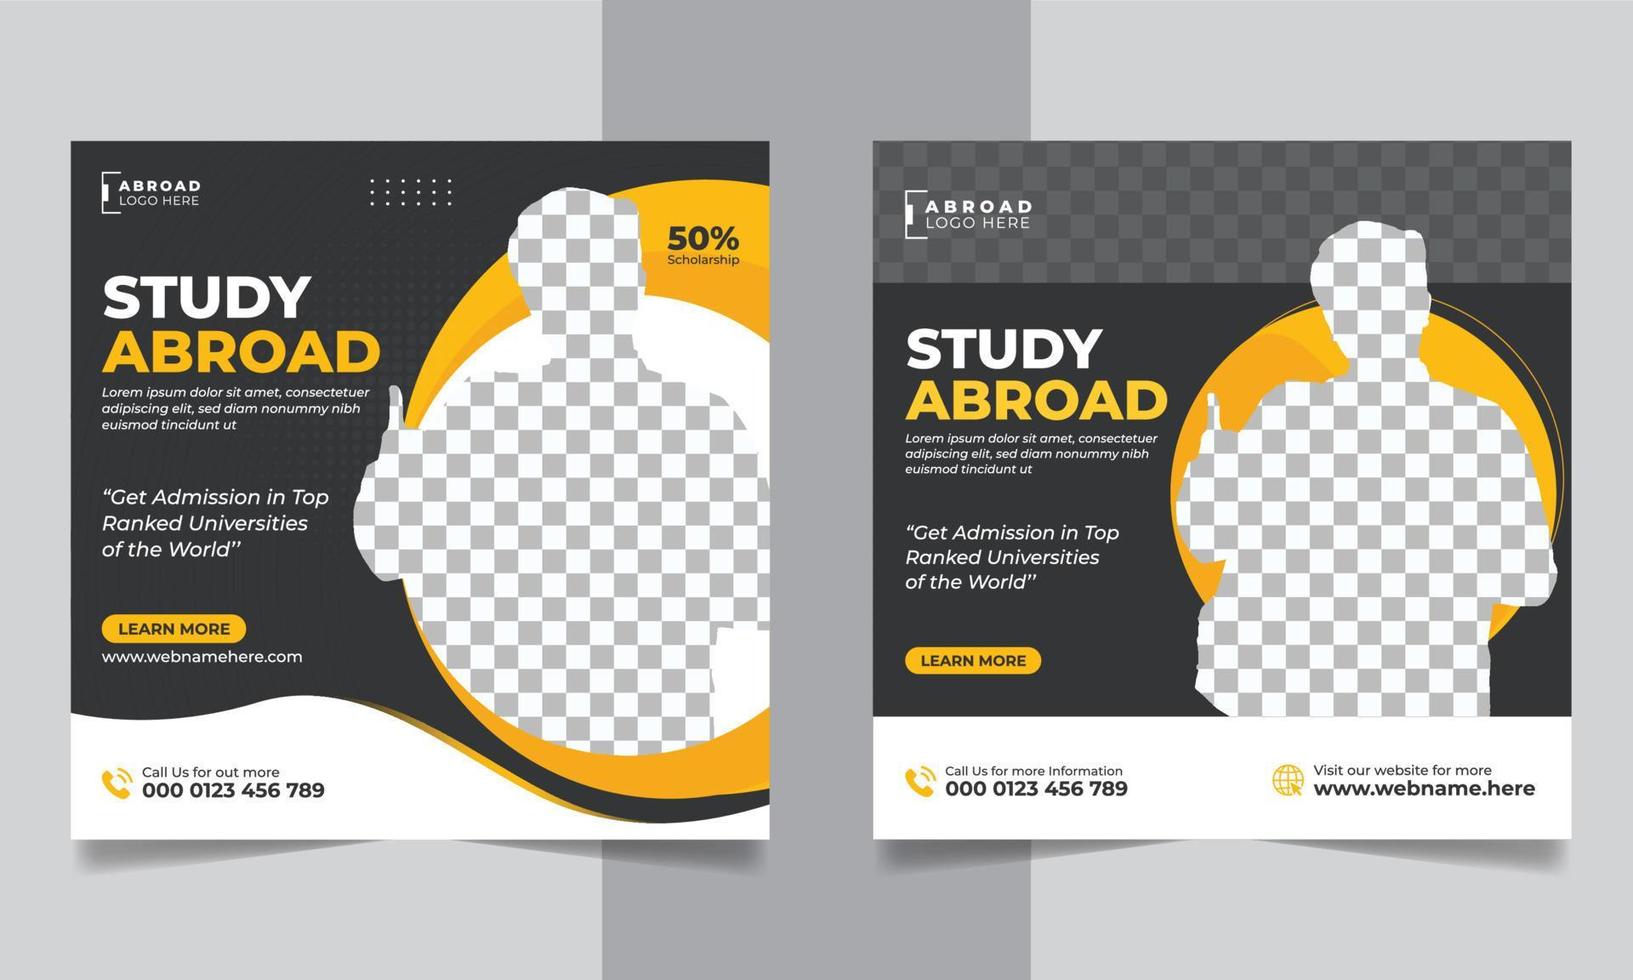 Study abroad social media post, education web banner square flyer template vector